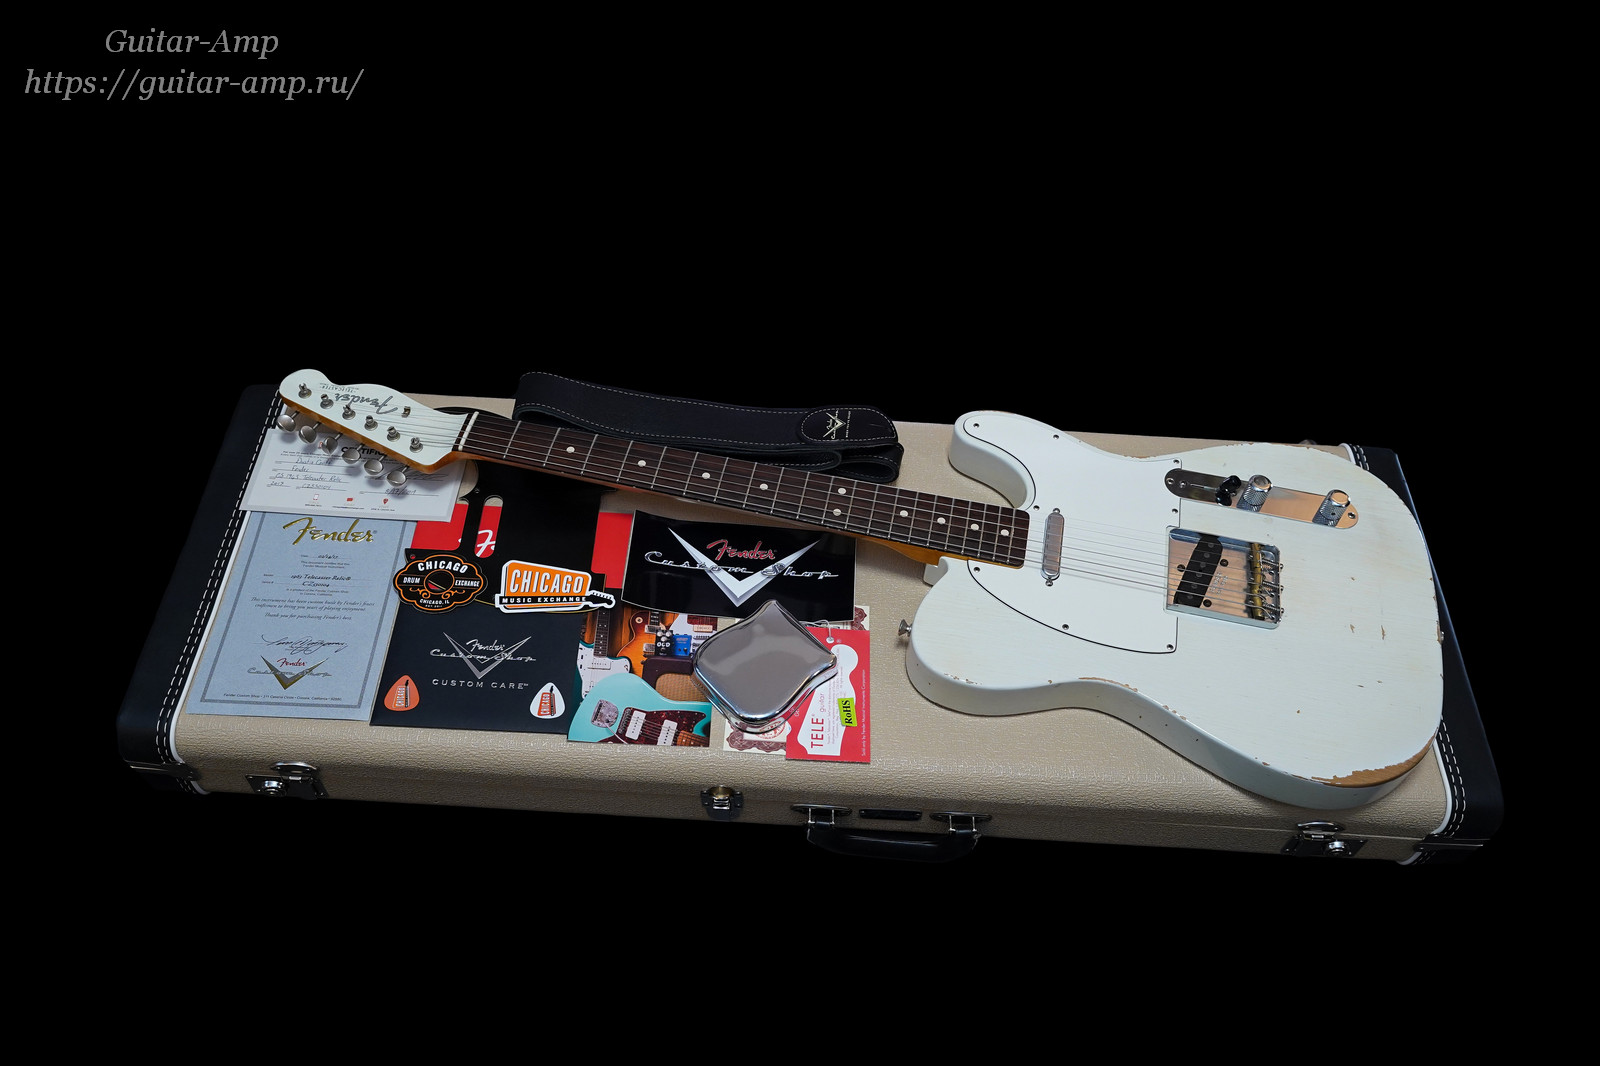 Fender Custom Shop Telecaster 1963 Limited Edition 30th Ann CME Special Run Aged White Relic 2017 21_x1600.jpg